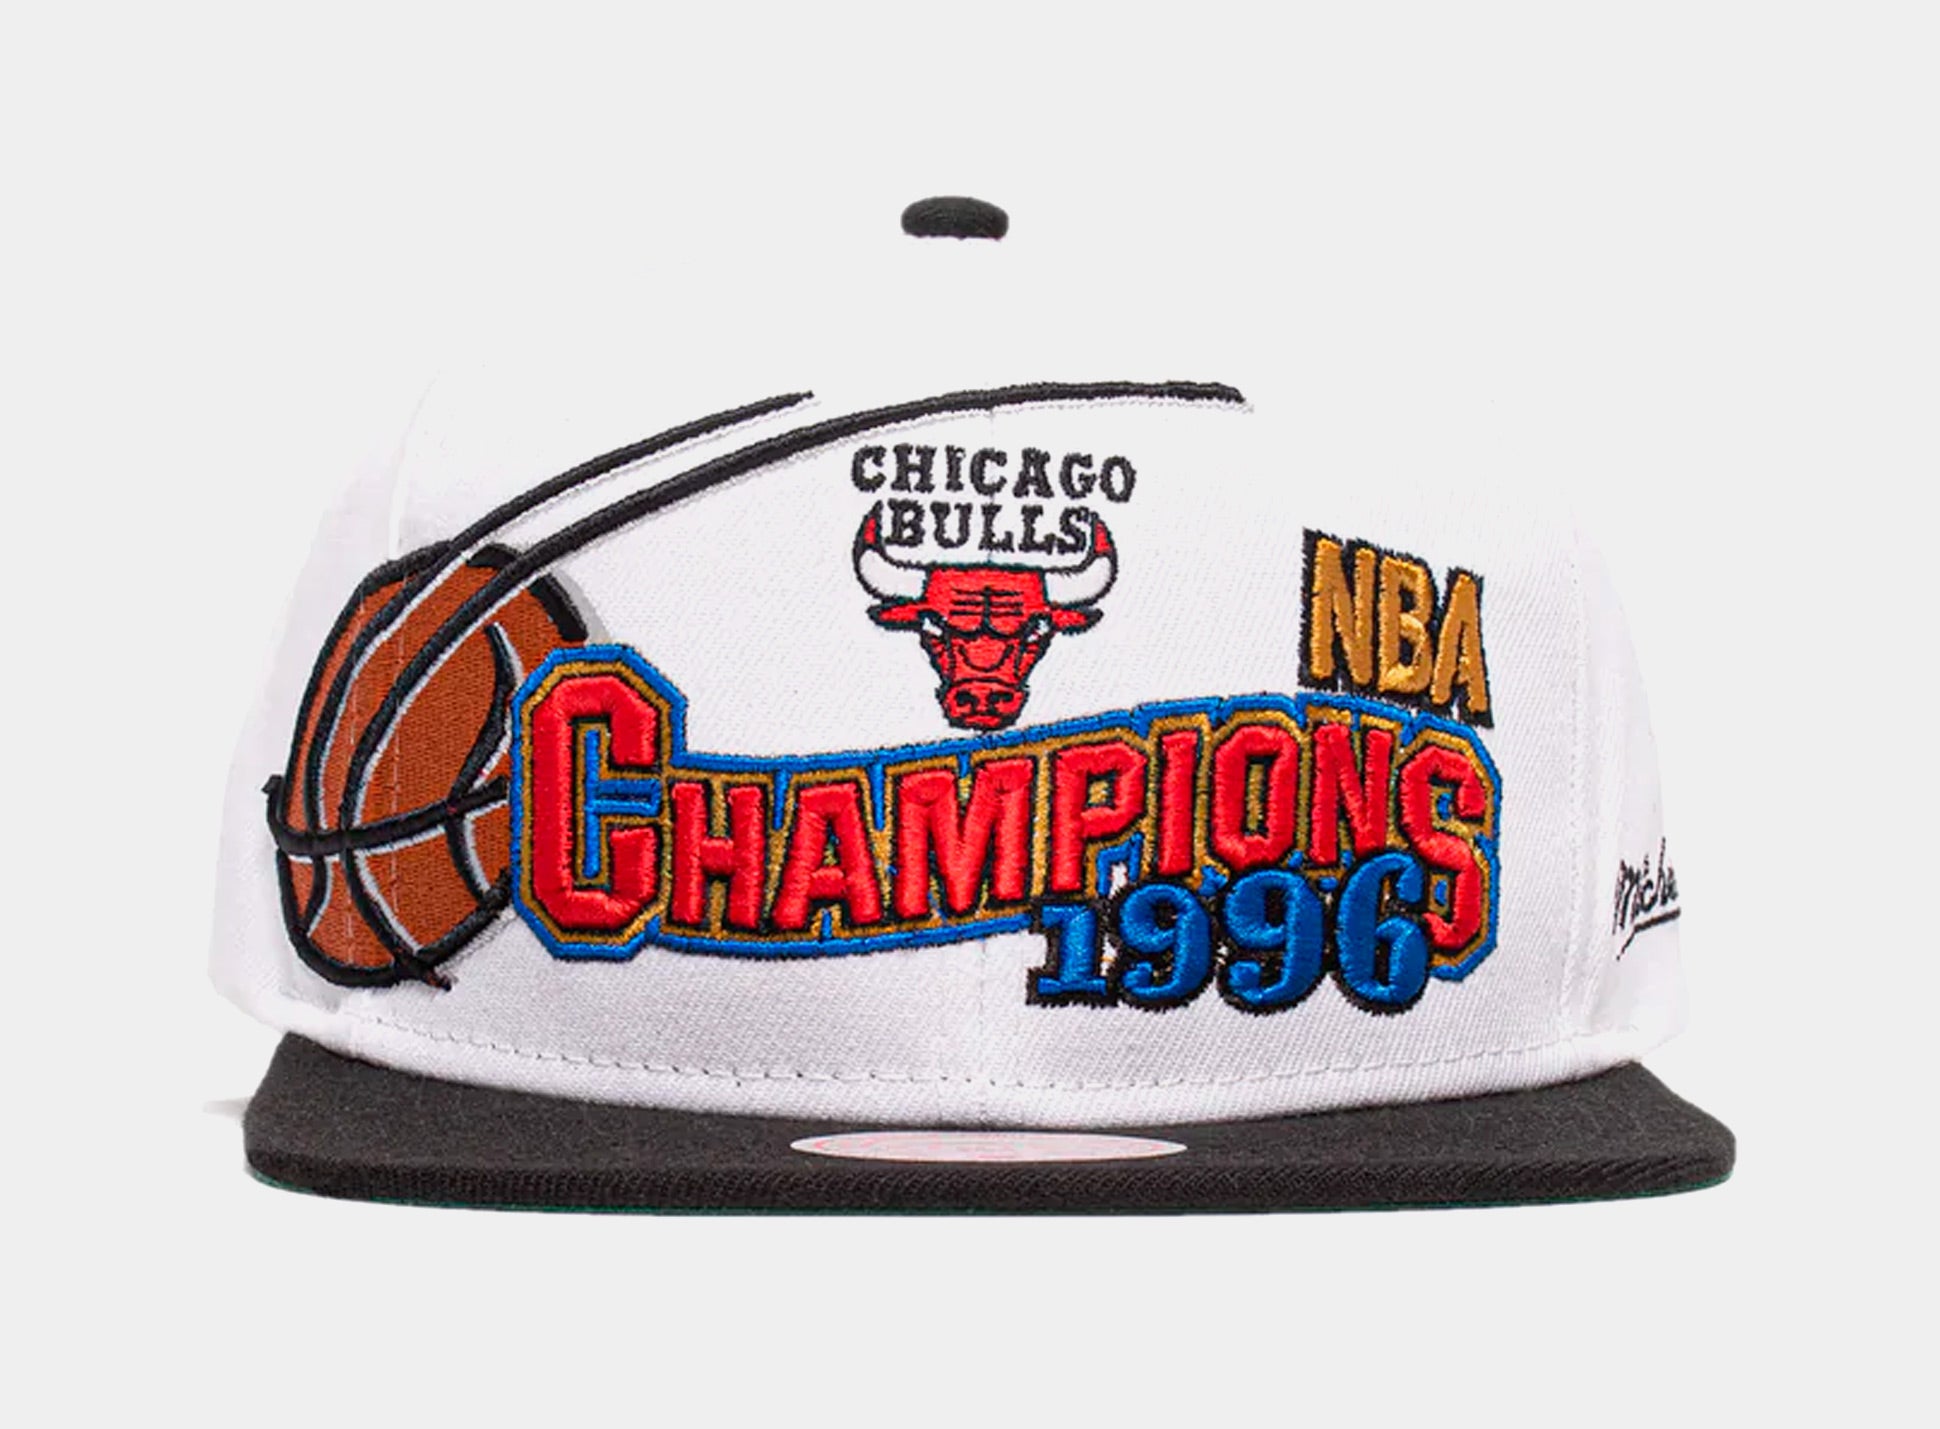 MITCHELL & NESS: BAGS AND ACCESSORIES, MITCHELL AND NESS CHICAGO BULLS  BASEBAL